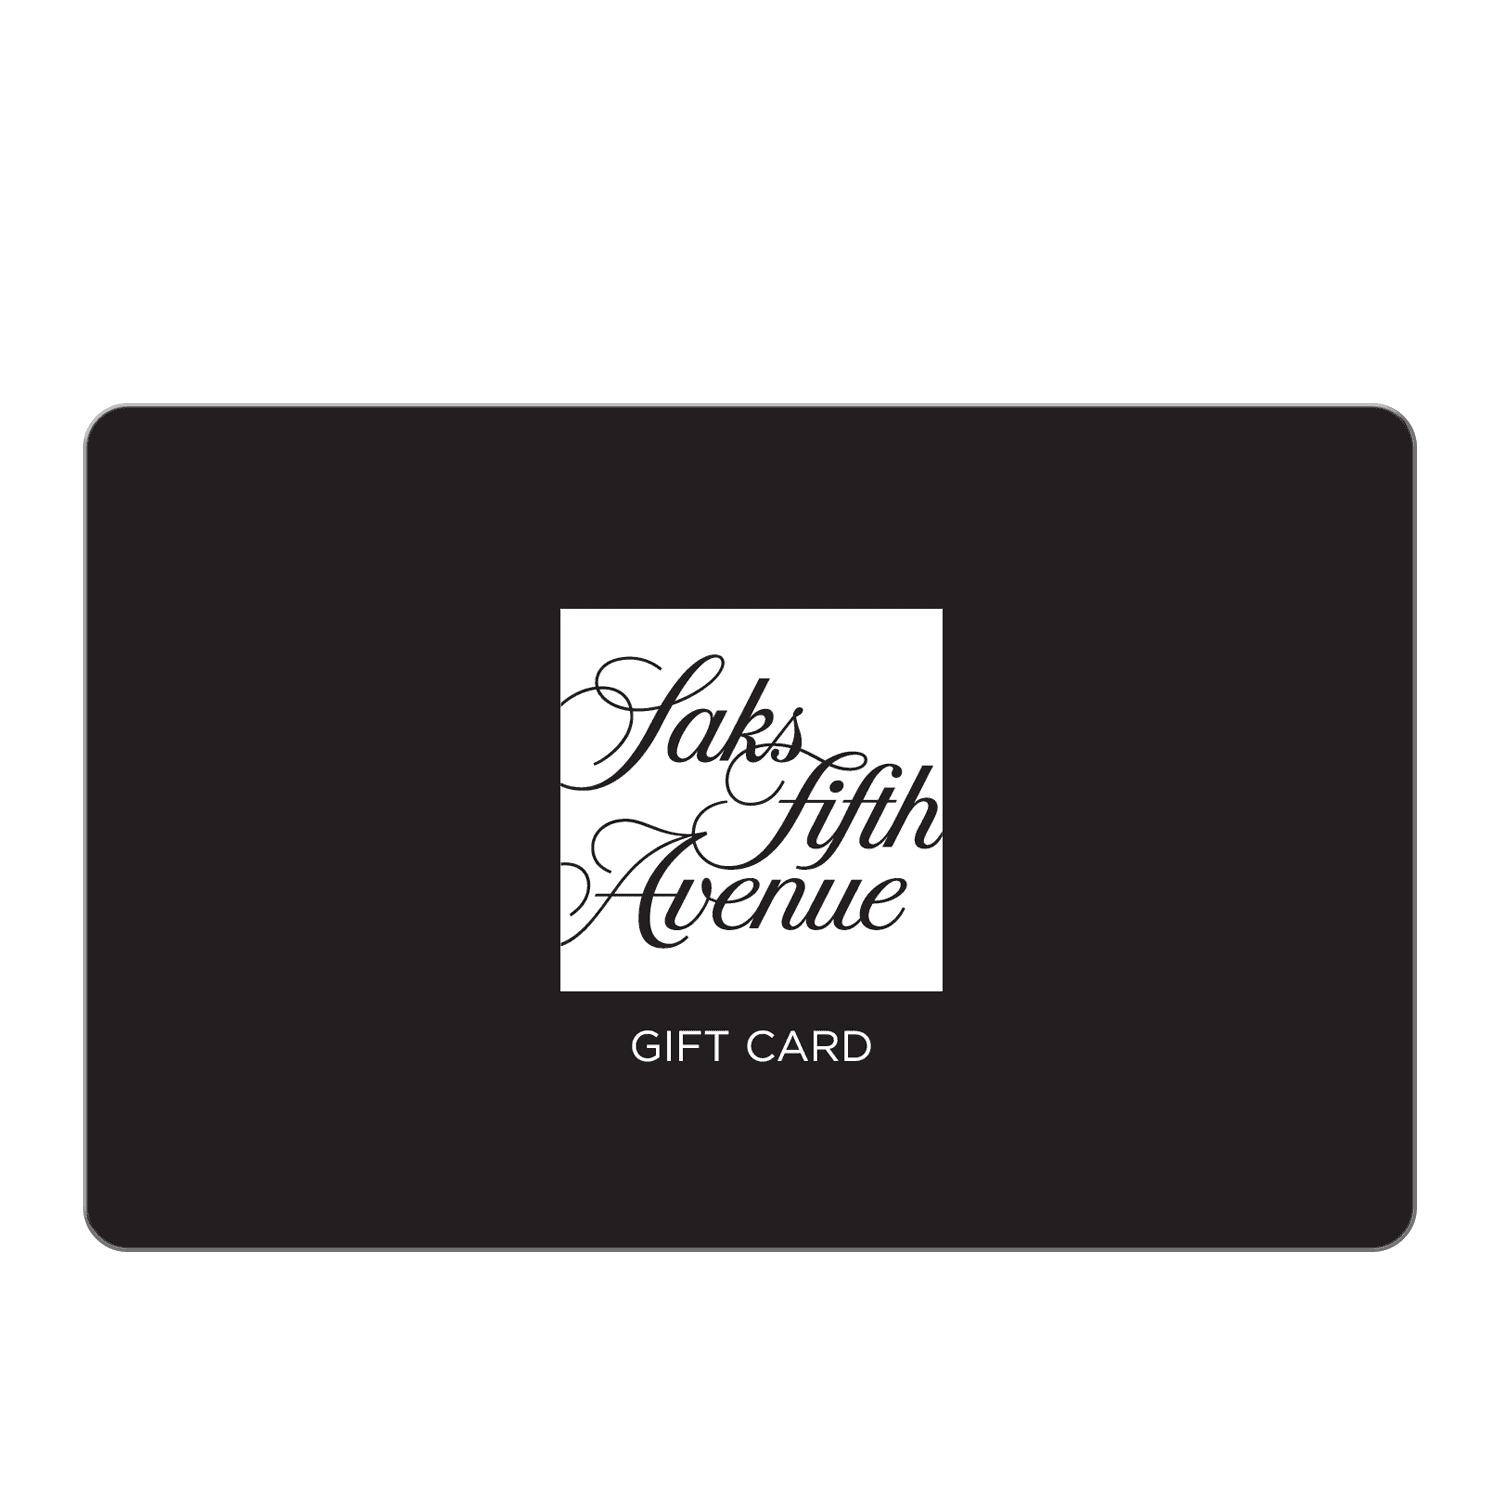 Saks Fifth Avenue CA Gift Card